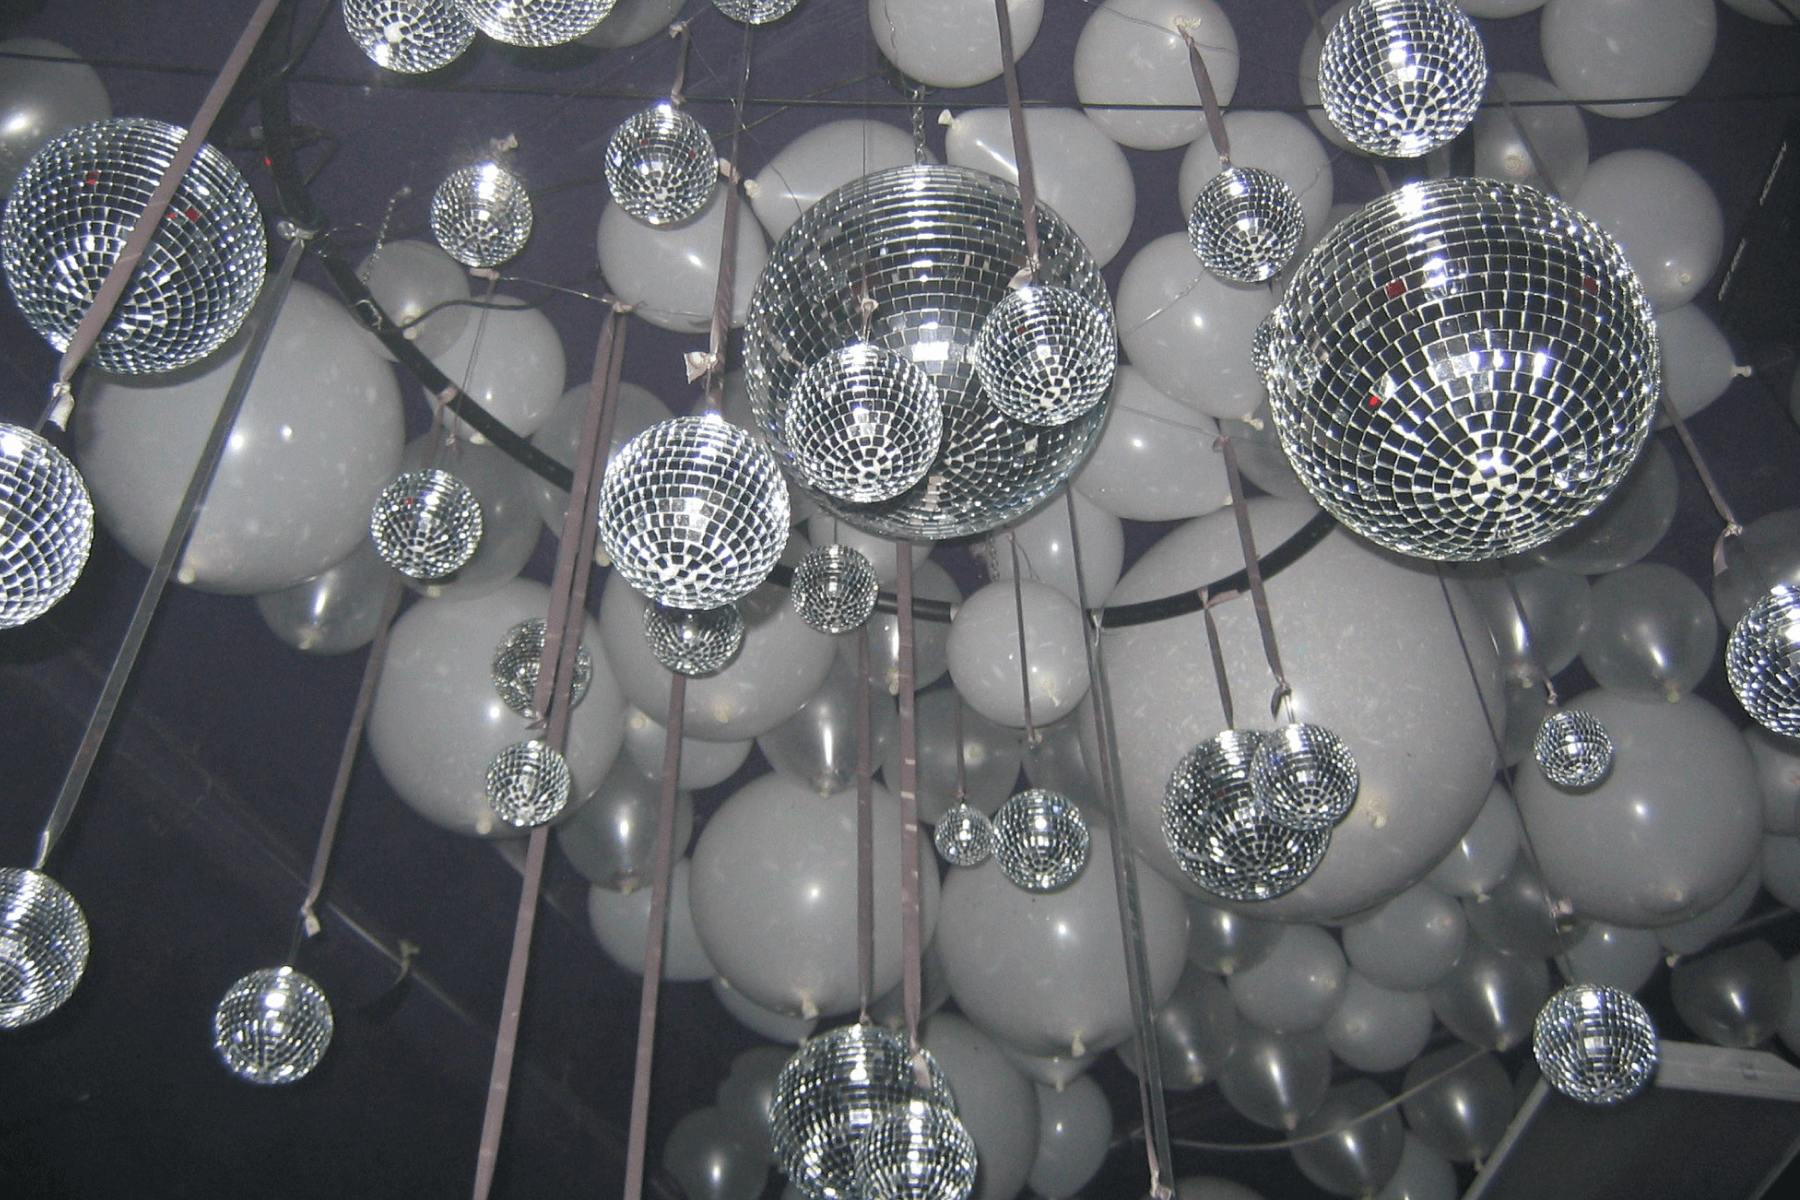 A view from below of multi-sized disco balls and shimmery white balloons hanging from the ceiling.